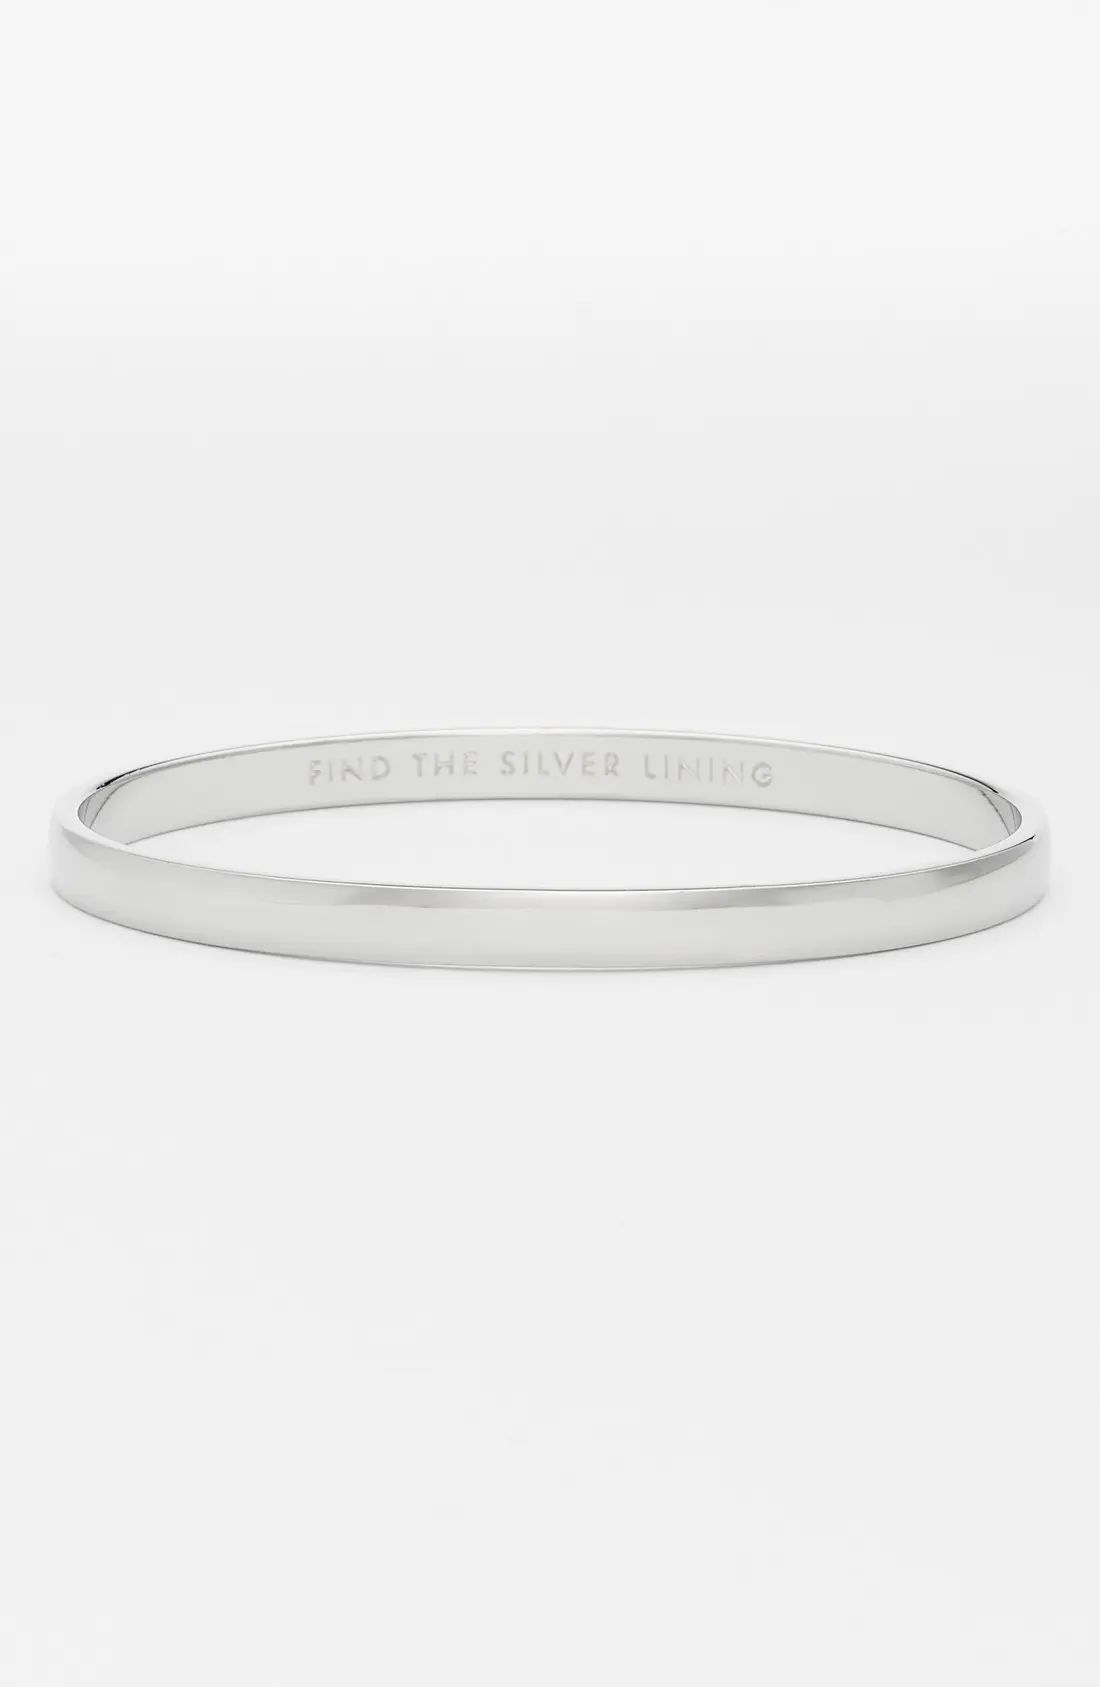 'idiom - find the silver lining' bangle | Nordstrom